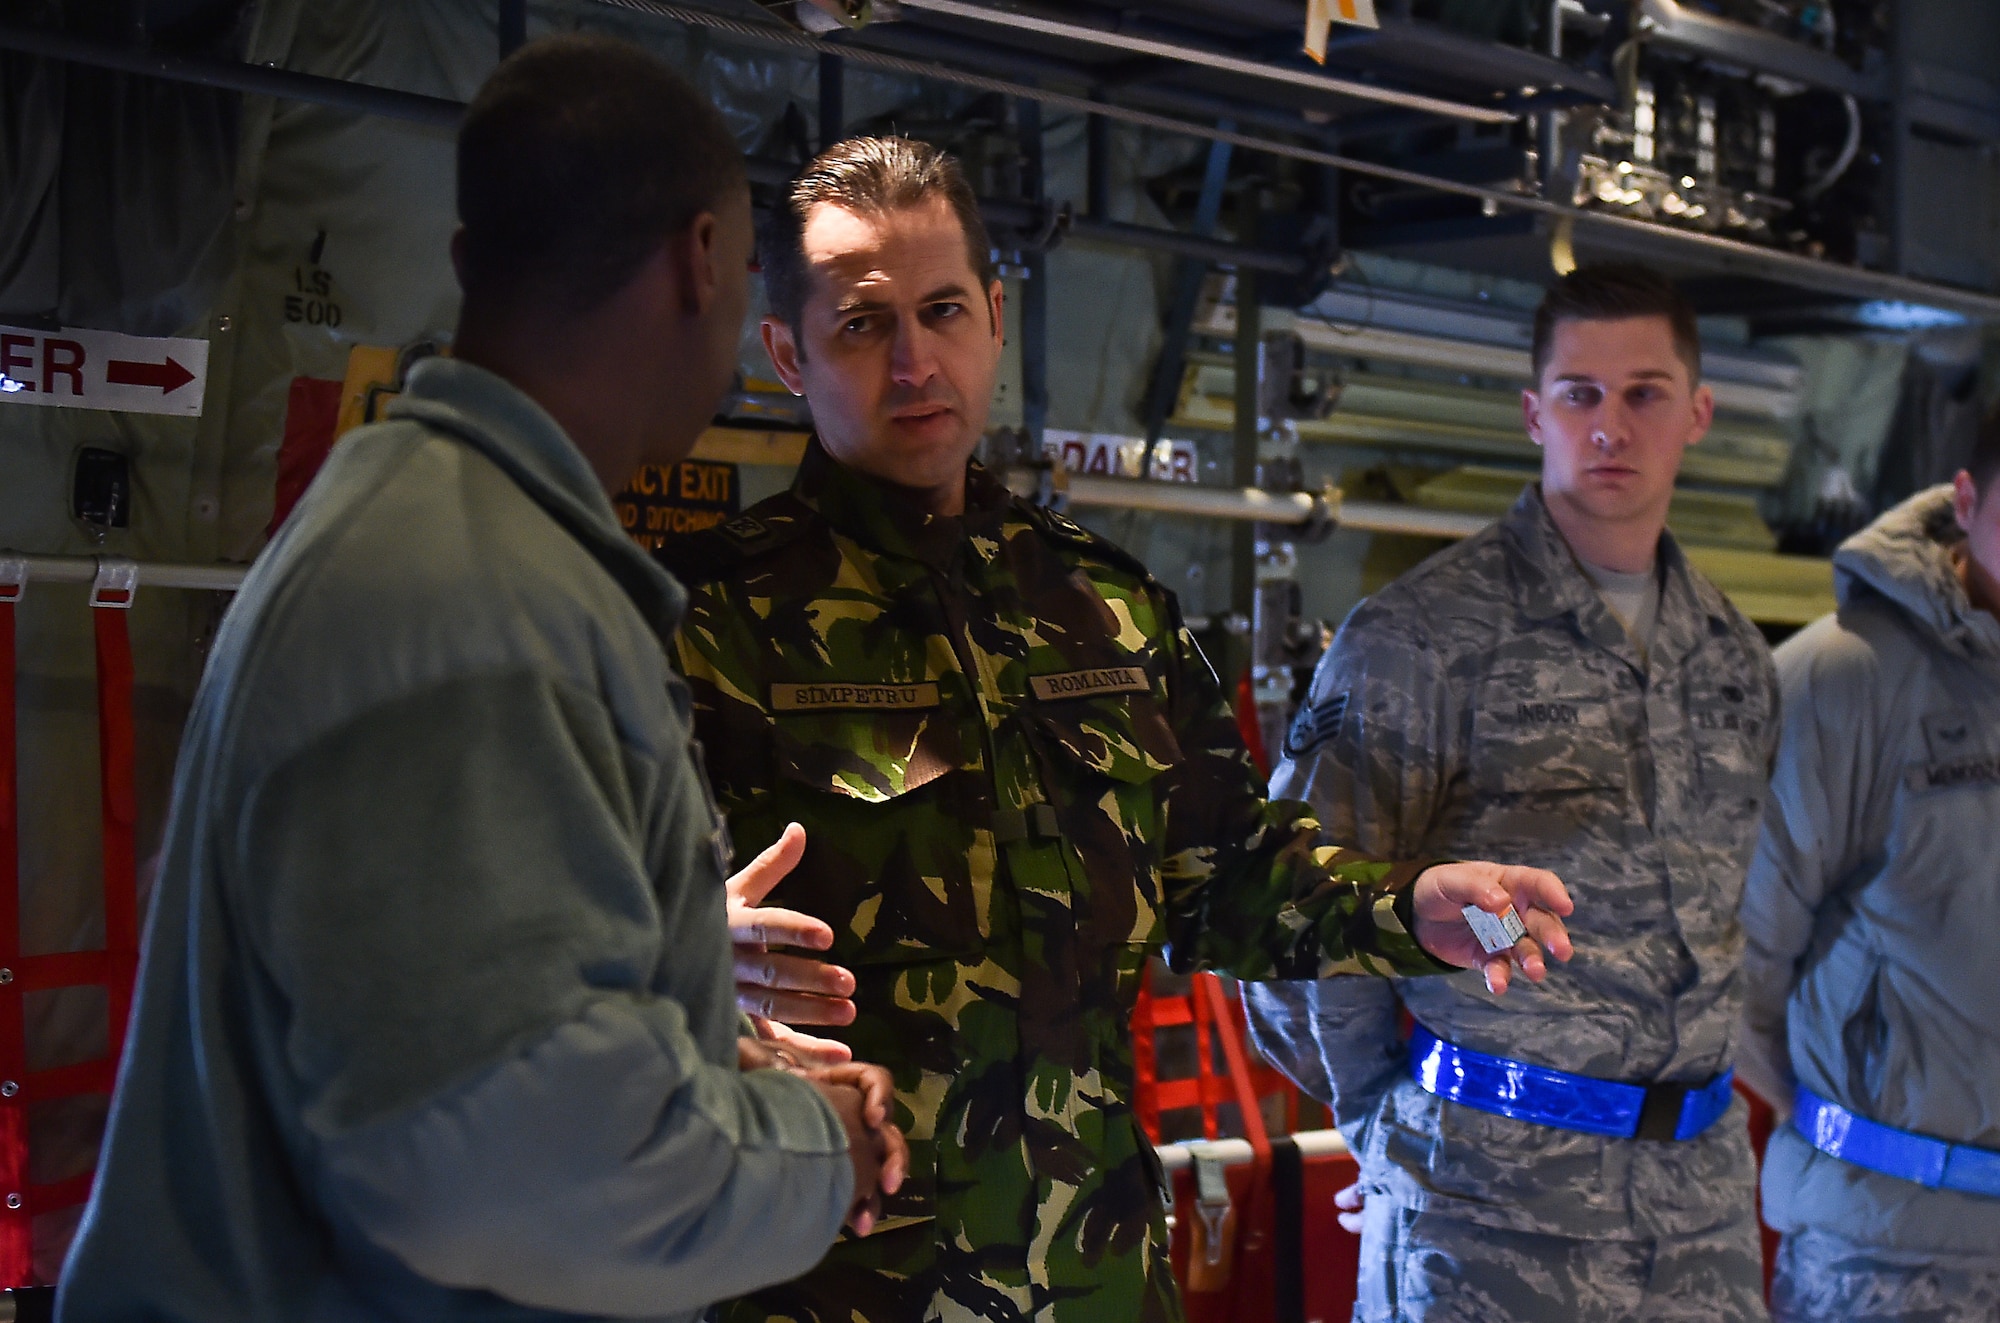 Chief Master Sgt. of the Romanian Air Force Daniel Simpetru discusses the capabilities of a C-130J Hercules with Tech. Sgt. Chris Willingham Feb. 23, 2015, at Ramstein Air Base, Germany. A group of enlisted leaders included the chief master sergeant of the Romanian and Estonian air forces and other leaders from the German, Italian, Slovenian and the U.K.’s air forces visited Ramstein AB before attending the Kaiserslautern Military Community First Sergeant Council's First Sergeant Symposium. Willingham is assigned to the 86th Aircraft Maintenance Squadron. (U.S. Air Force photo/Staff Sgt. Sara Keller)